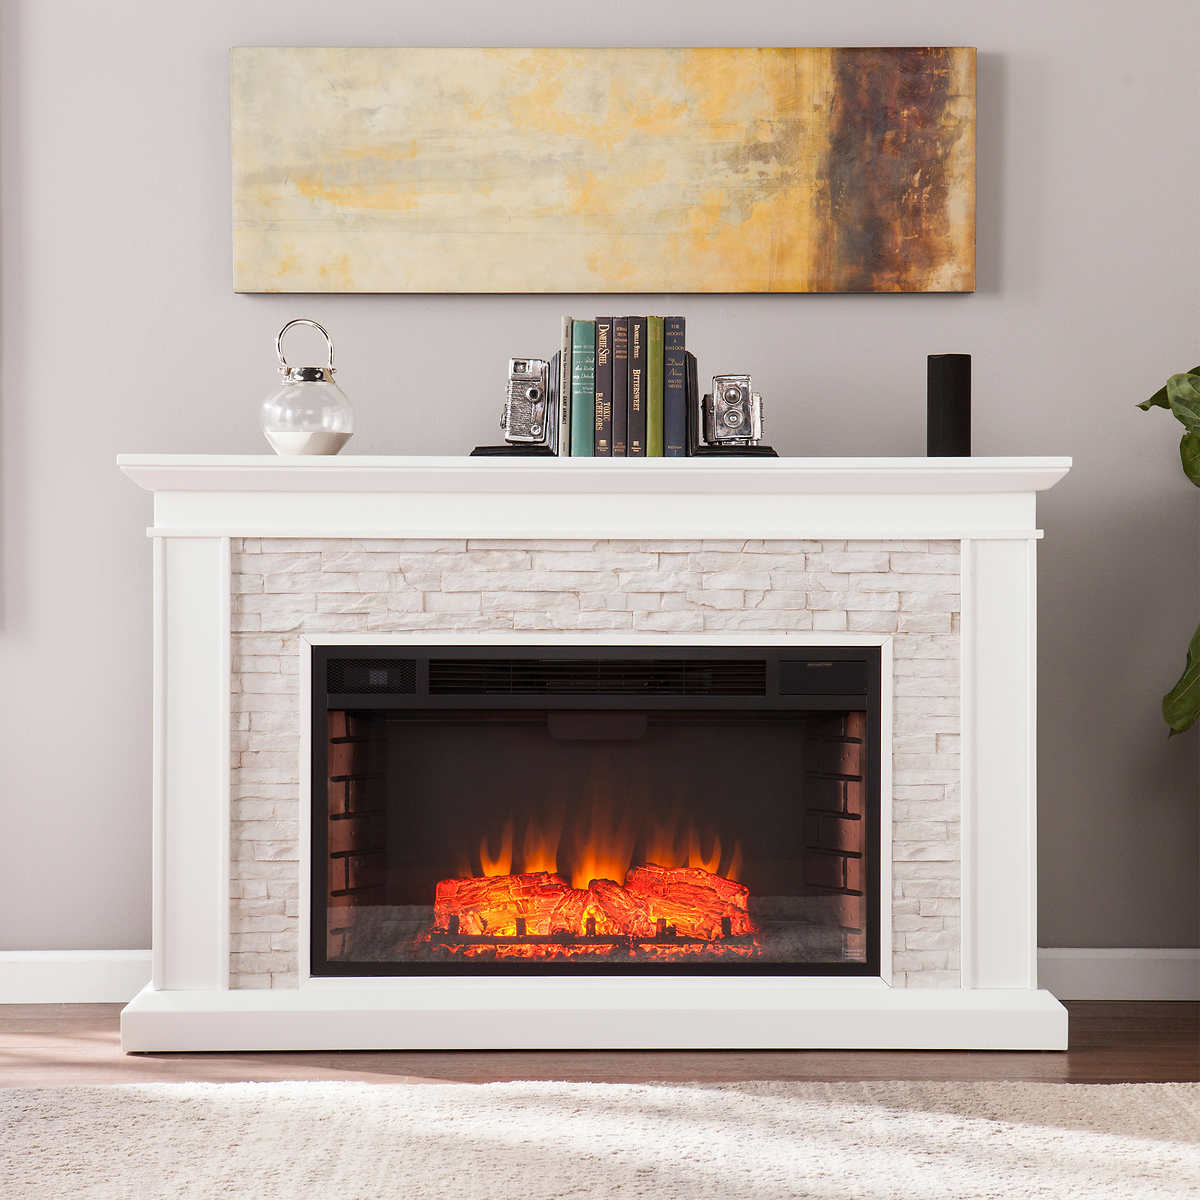 Costco - Ledgestone Electric Fireplace with Stacked Stone – White / Gray - Retail $749